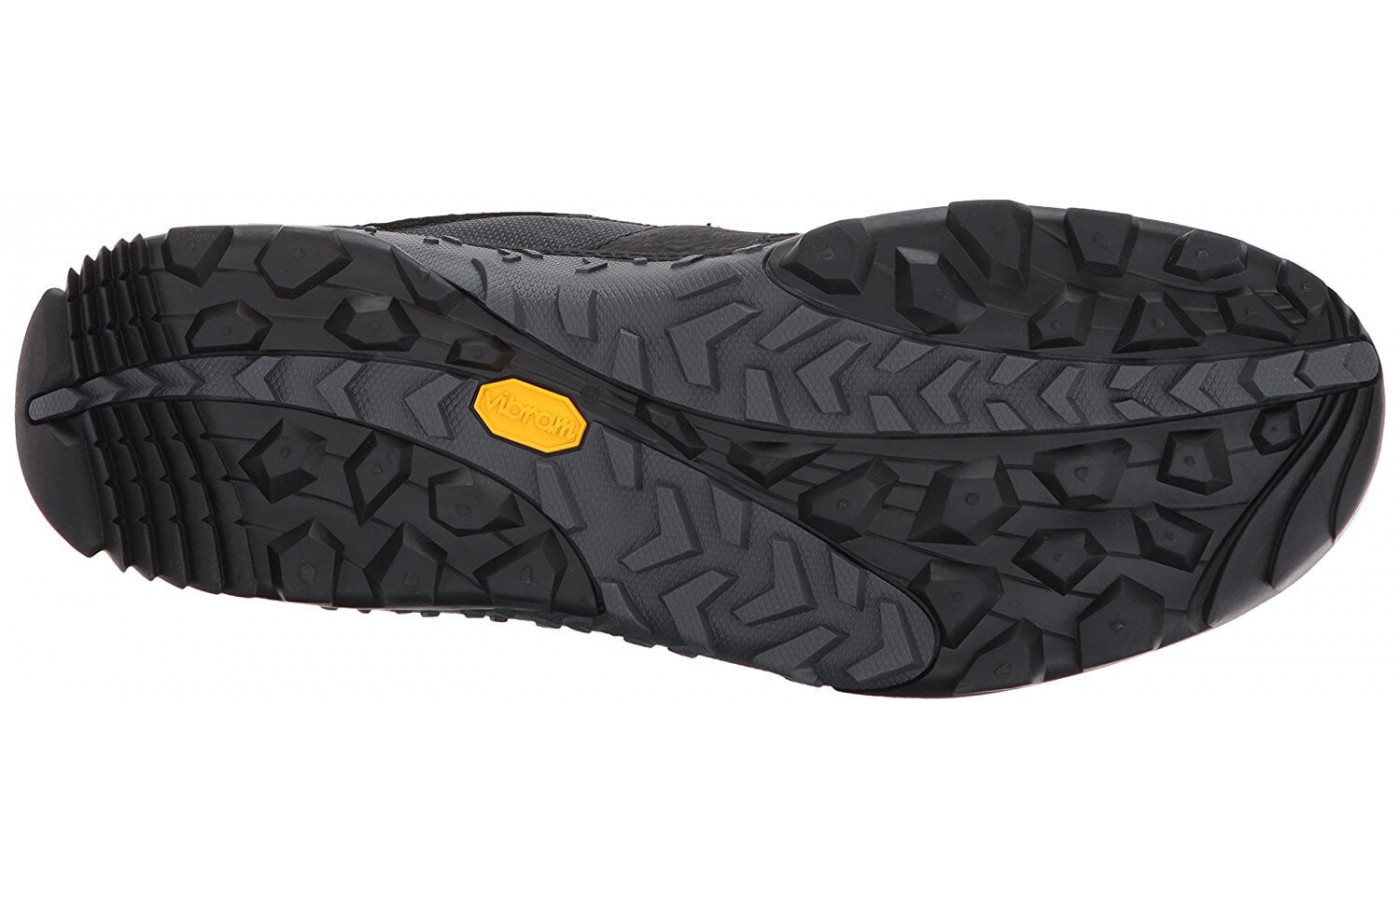 The Merrell Men's Annex Trak Low Shoe offers superior traction